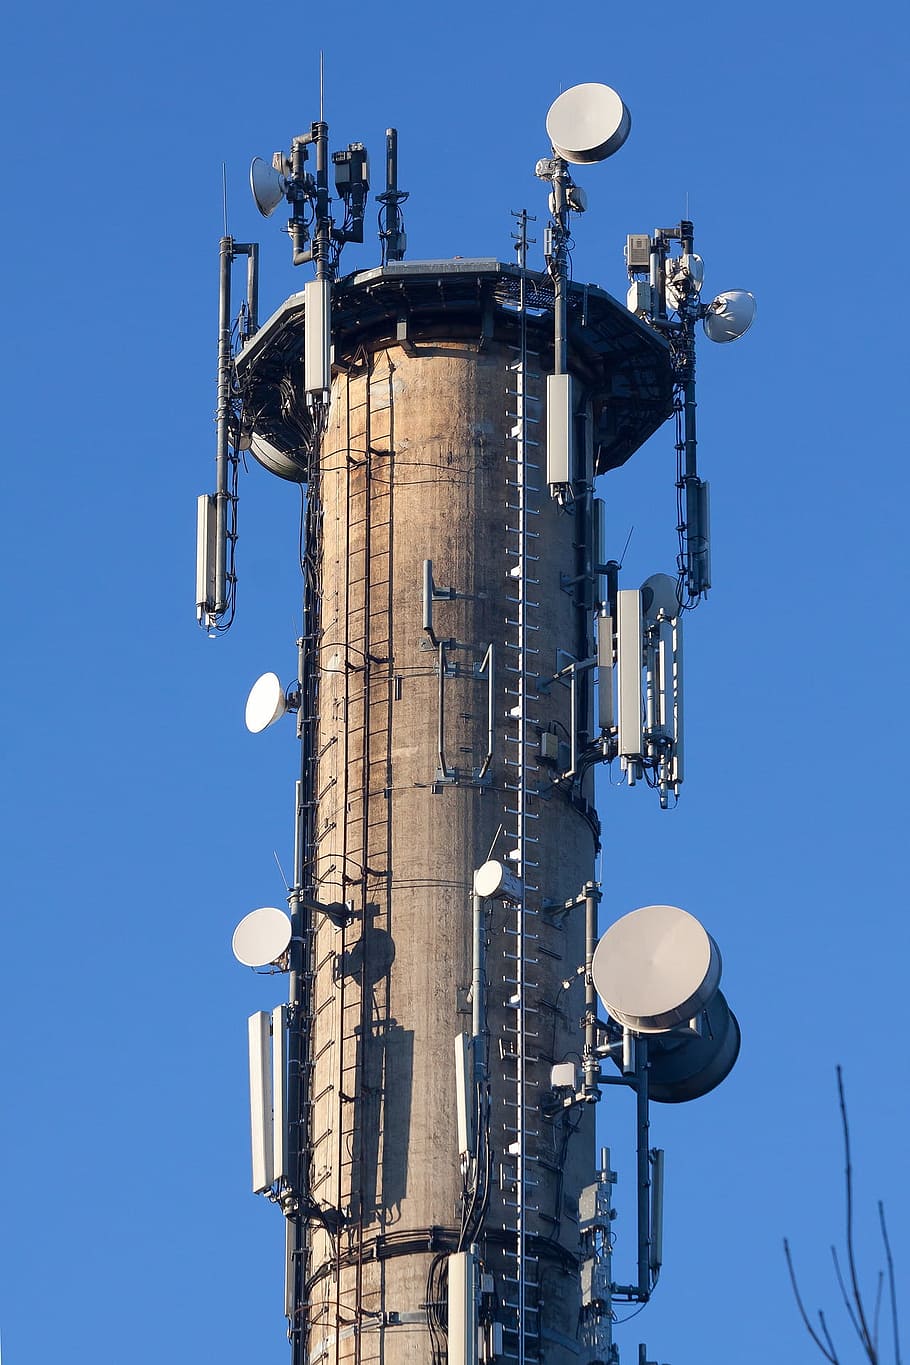 mast, service, radio, tower, construction, architecture, signal, high, height, built structure